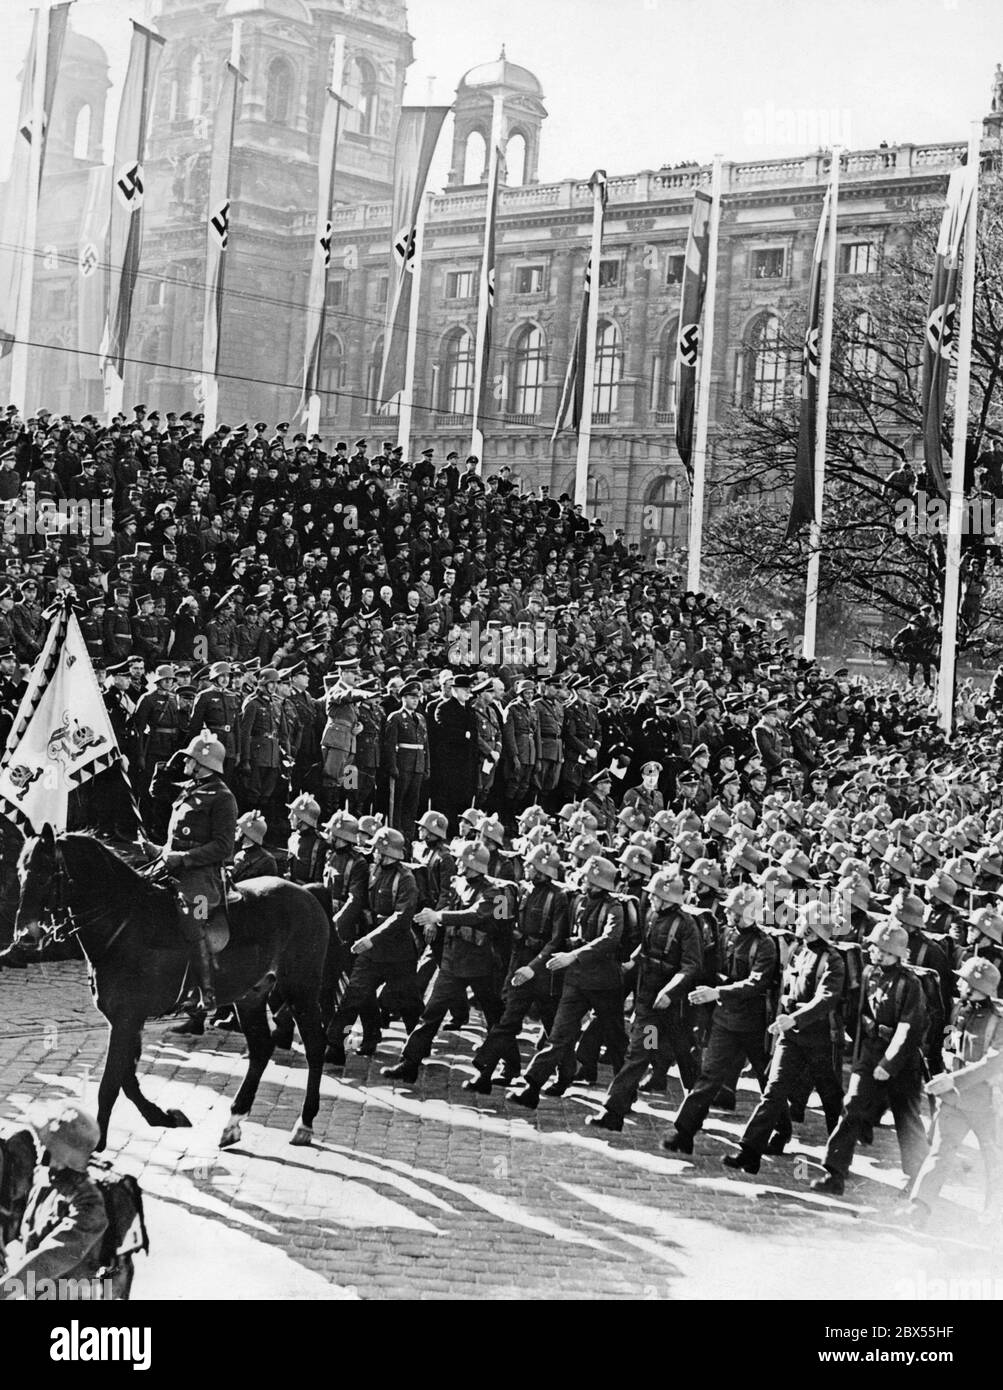 The 8th Army of the Wehrmacht marches in front of Adolf Hitler on the Heldenplatz in Vienna, here Austrian soldiers. There, Hitler announces the annexation of Austria to the German Reich. To the right of Adolf Hitler are the generals Fedor von Bock and Alfred Krauss (in civilian clothes). Stock Photo